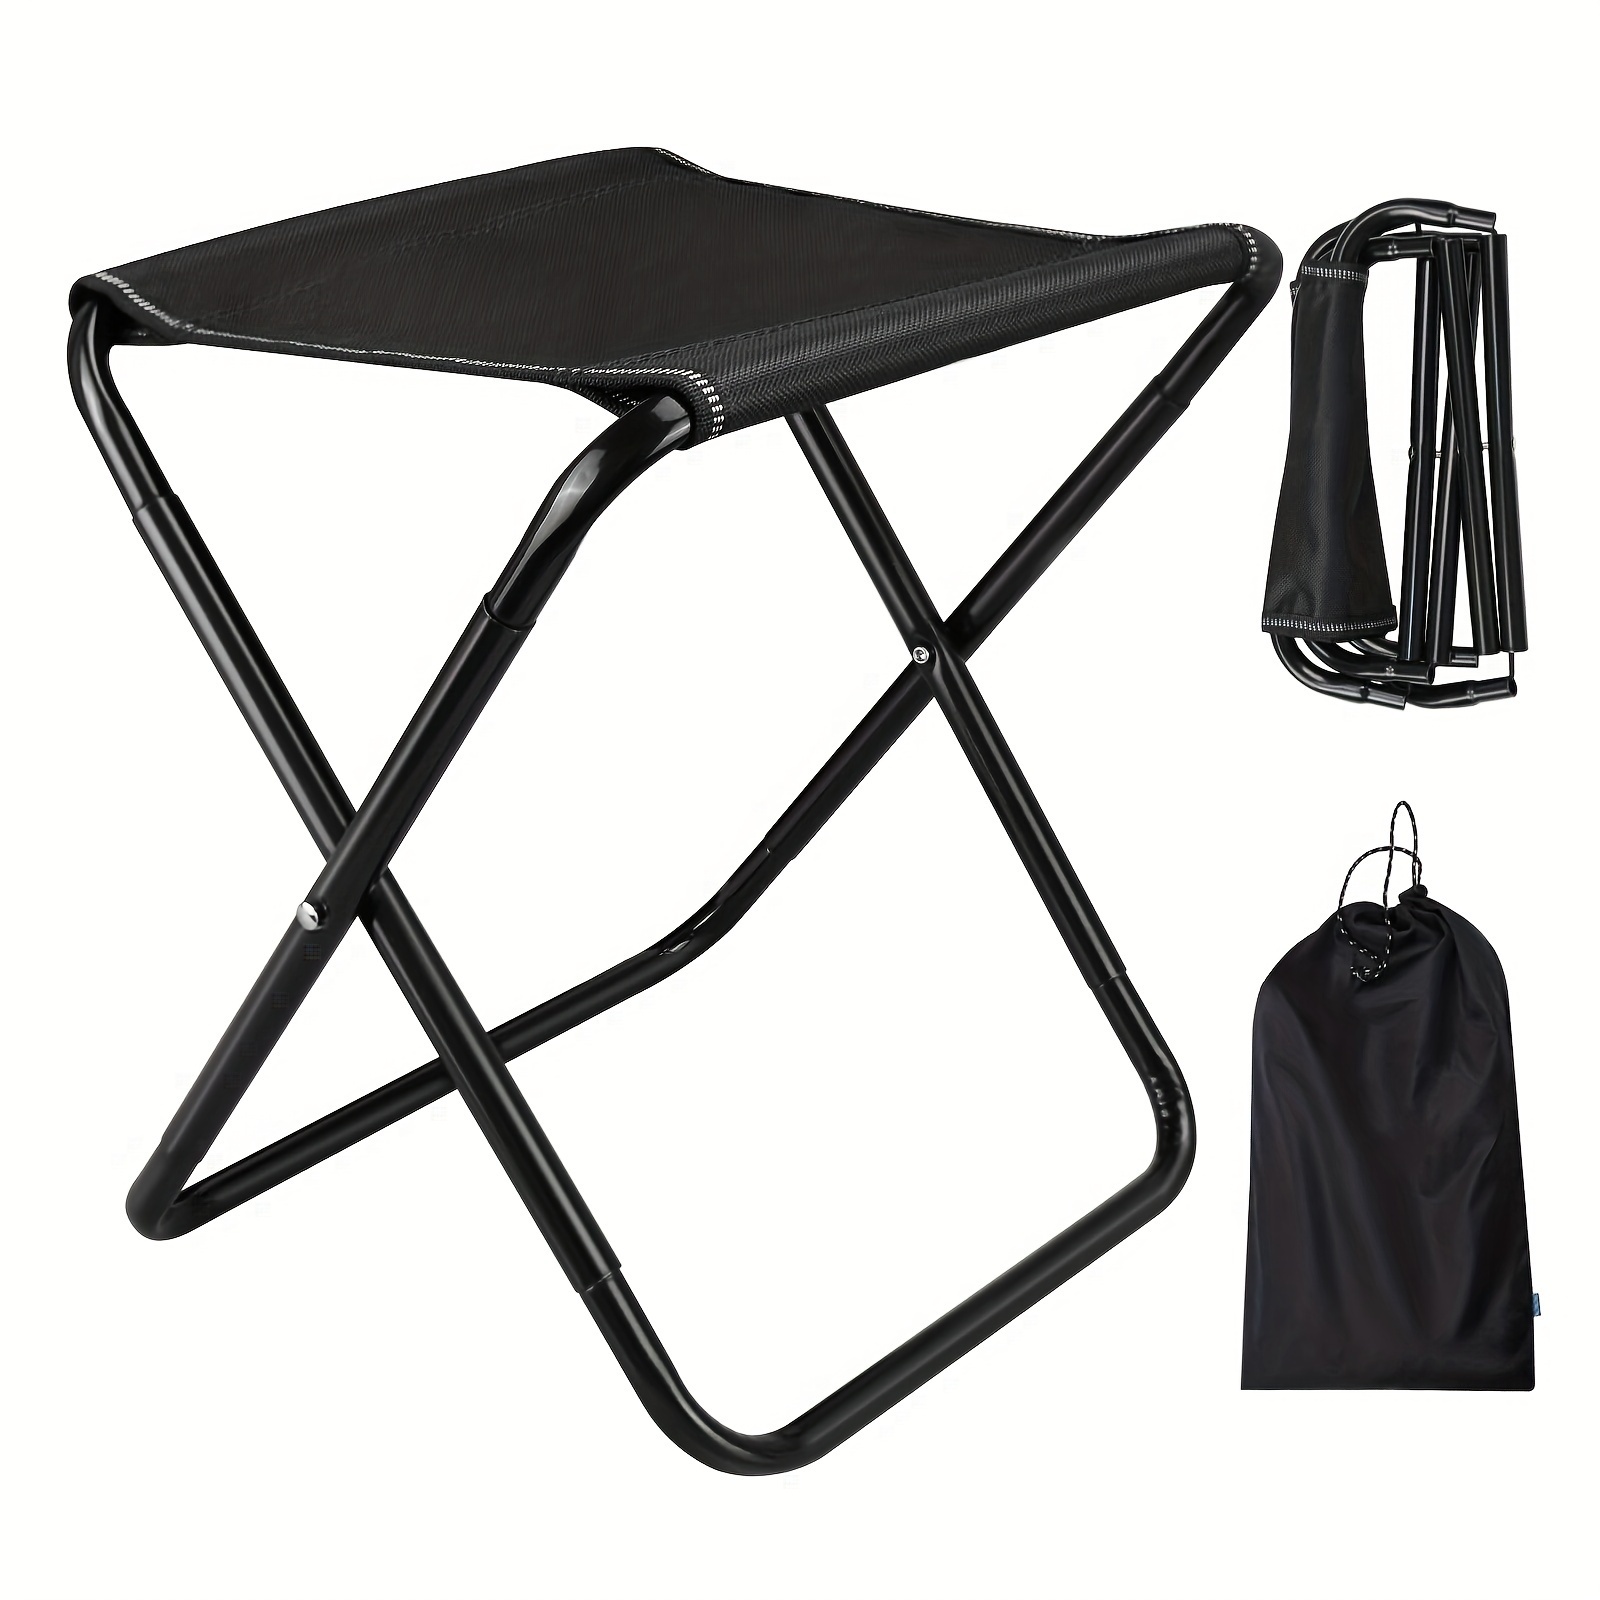 Camping Stool Folding, Fishing Chair, Easy to Carry, Foldable Camping Seat,  Saddle Chair Portable for Party Fishing Festival Gardening Hiking Black 